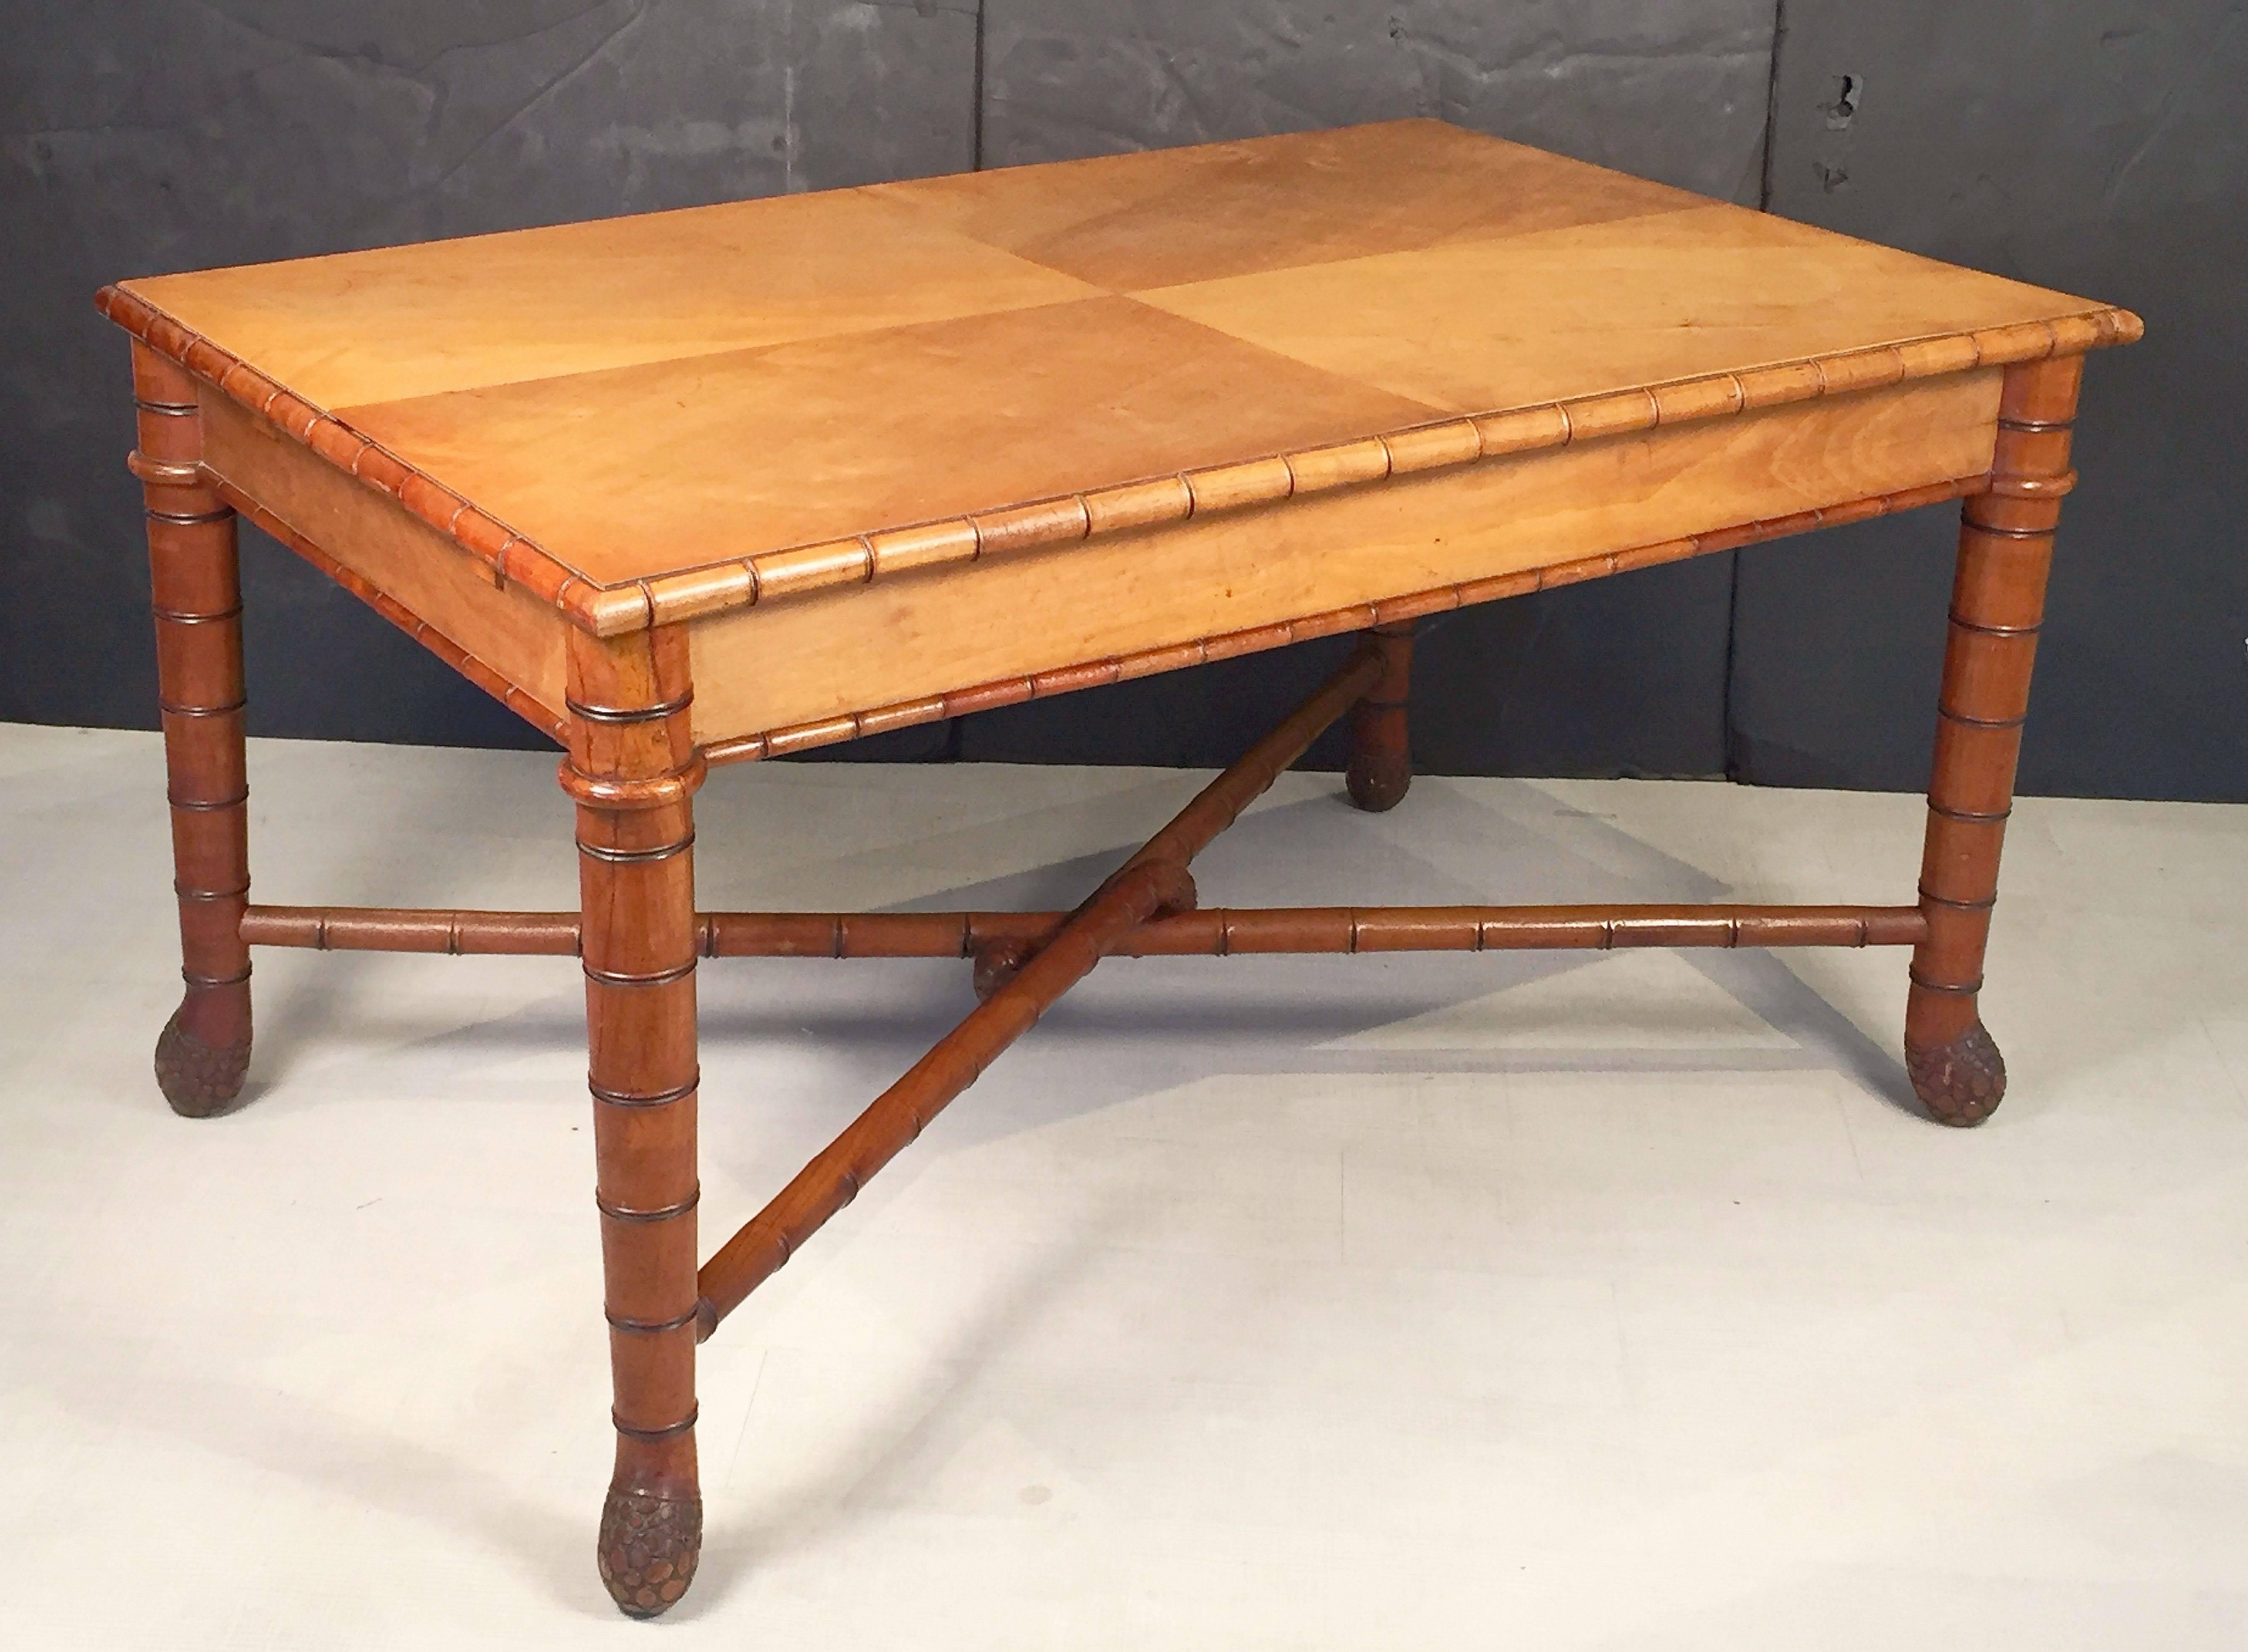 A fine large faux bamboo library table from Italy, featuring a moulded rectangular top over a frieze with a faux bamboo turned wood trim, over a four-legged stretcher with a stylish bamboo root design.